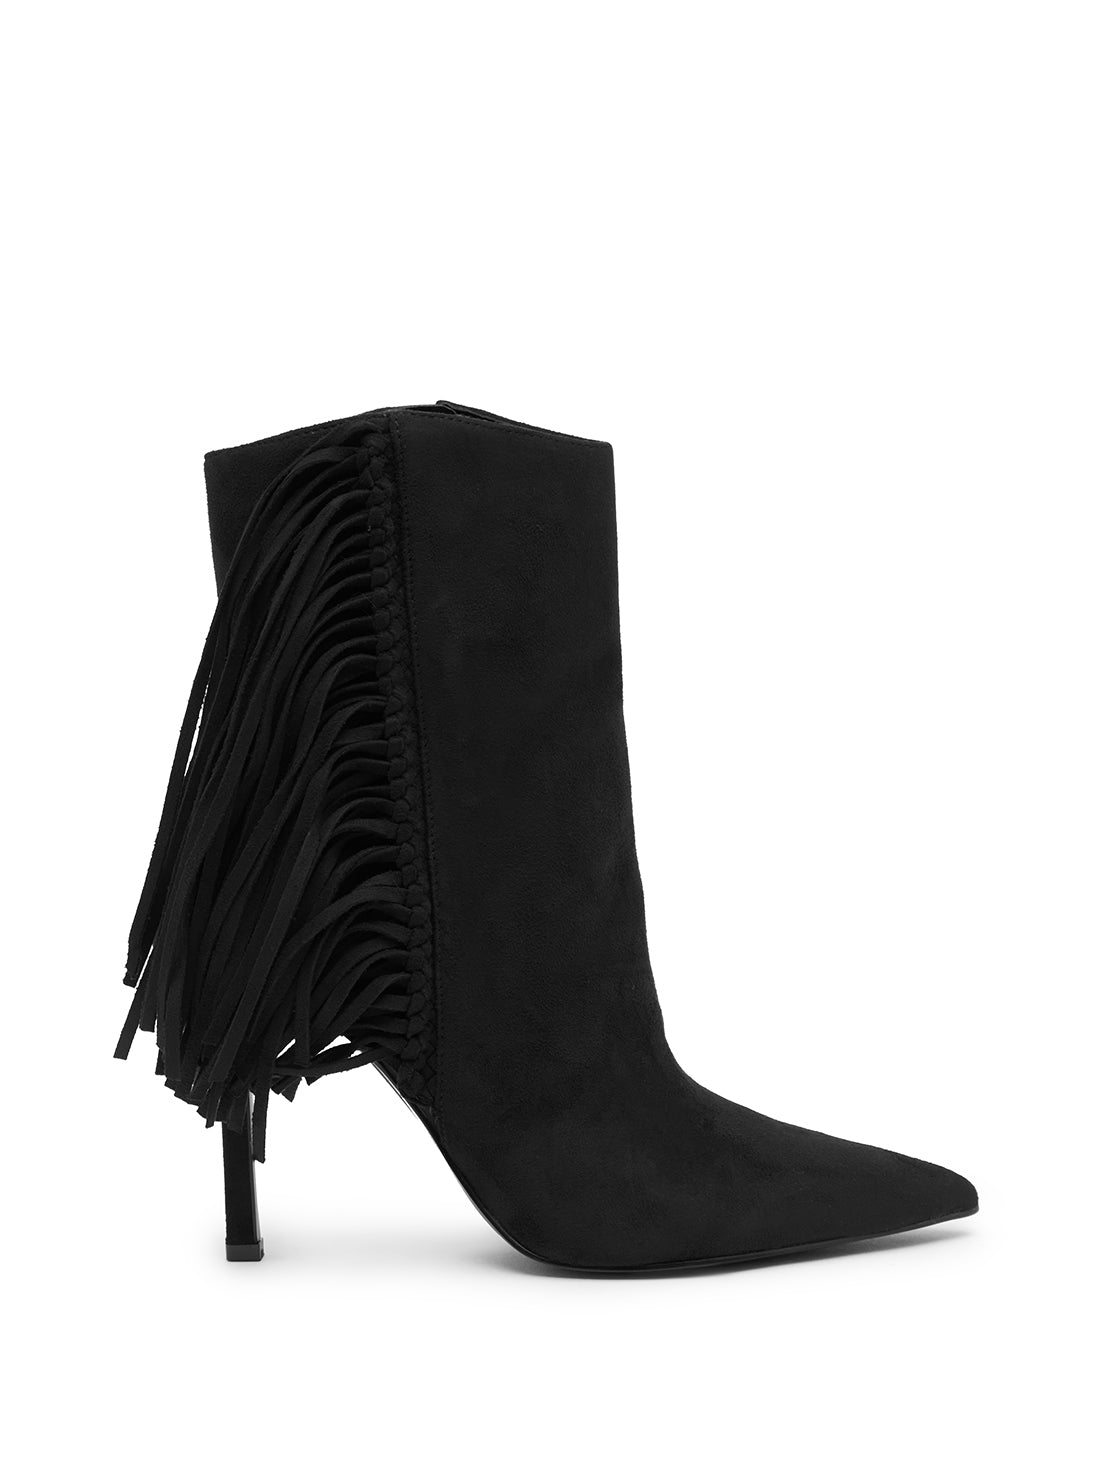 GUESS Women's Black Sidone Suede Boots SIDONE Side View